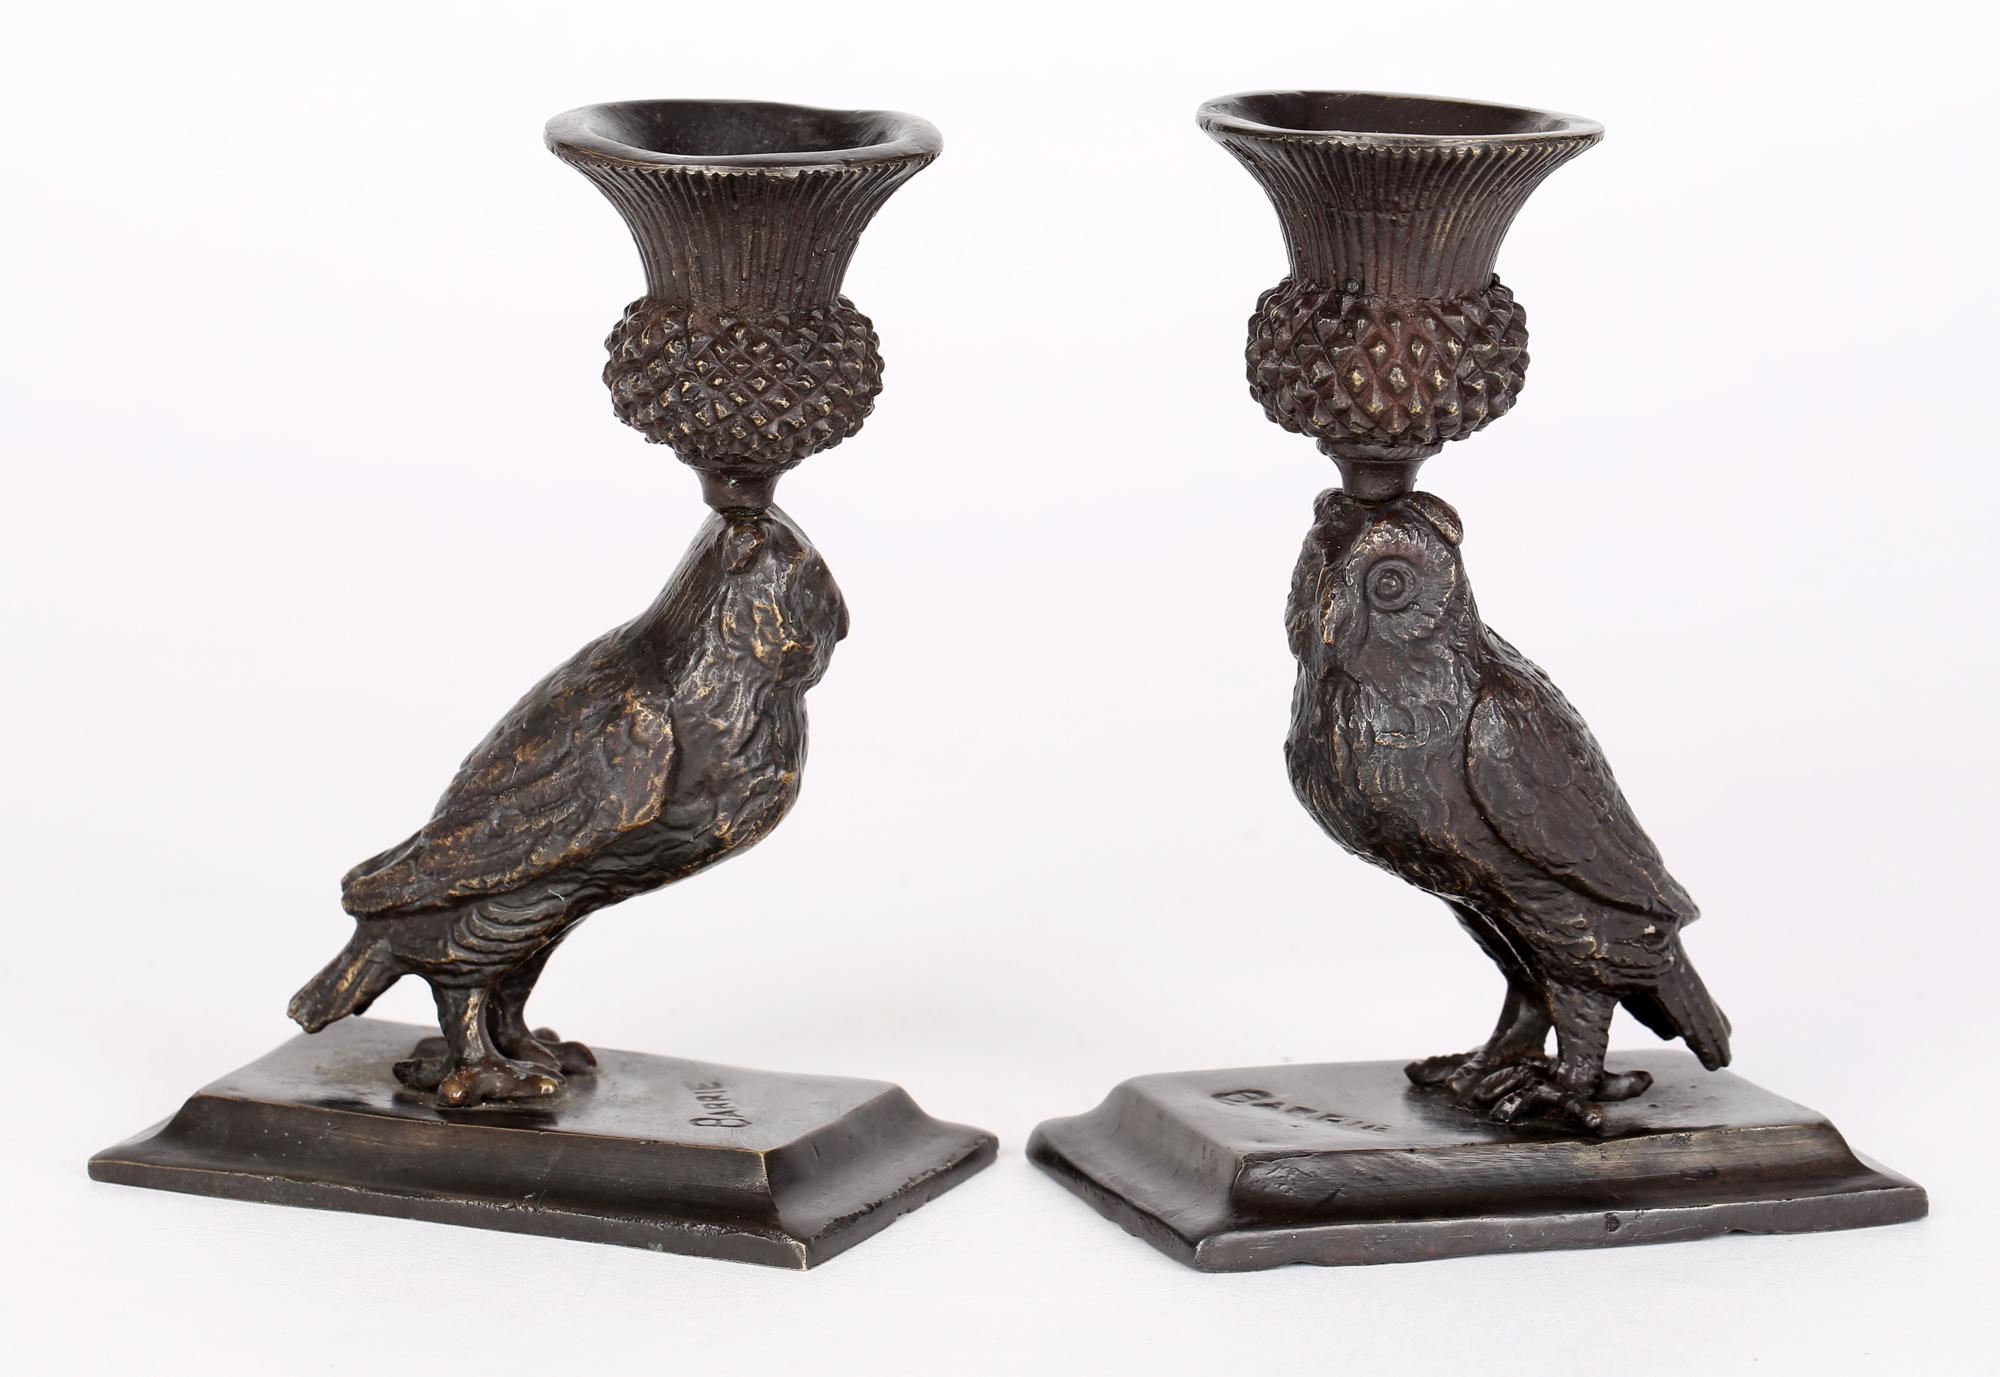 A good Art Deco pair bronze candlesticks modelled as owls with thistle shaped sconces dating from around 1920-30. The candlesticks are mounted on rectangular stepped bases and are well detailed as standing owls with thistle flower candle holders